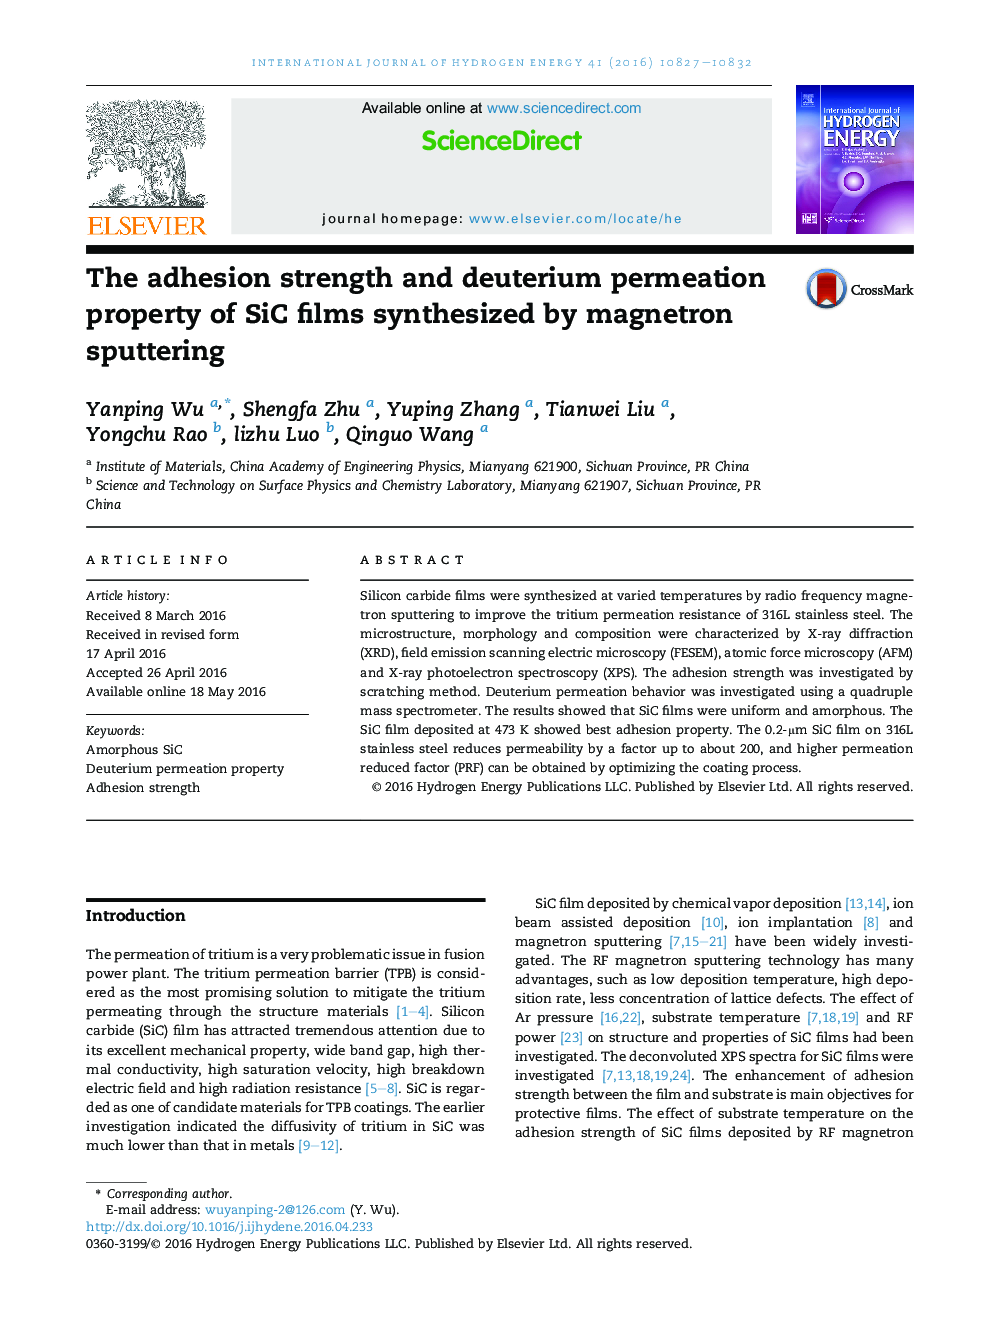 The adhesion strength and deuterium permeation property of SiC films synthesized by magnetron sputtering